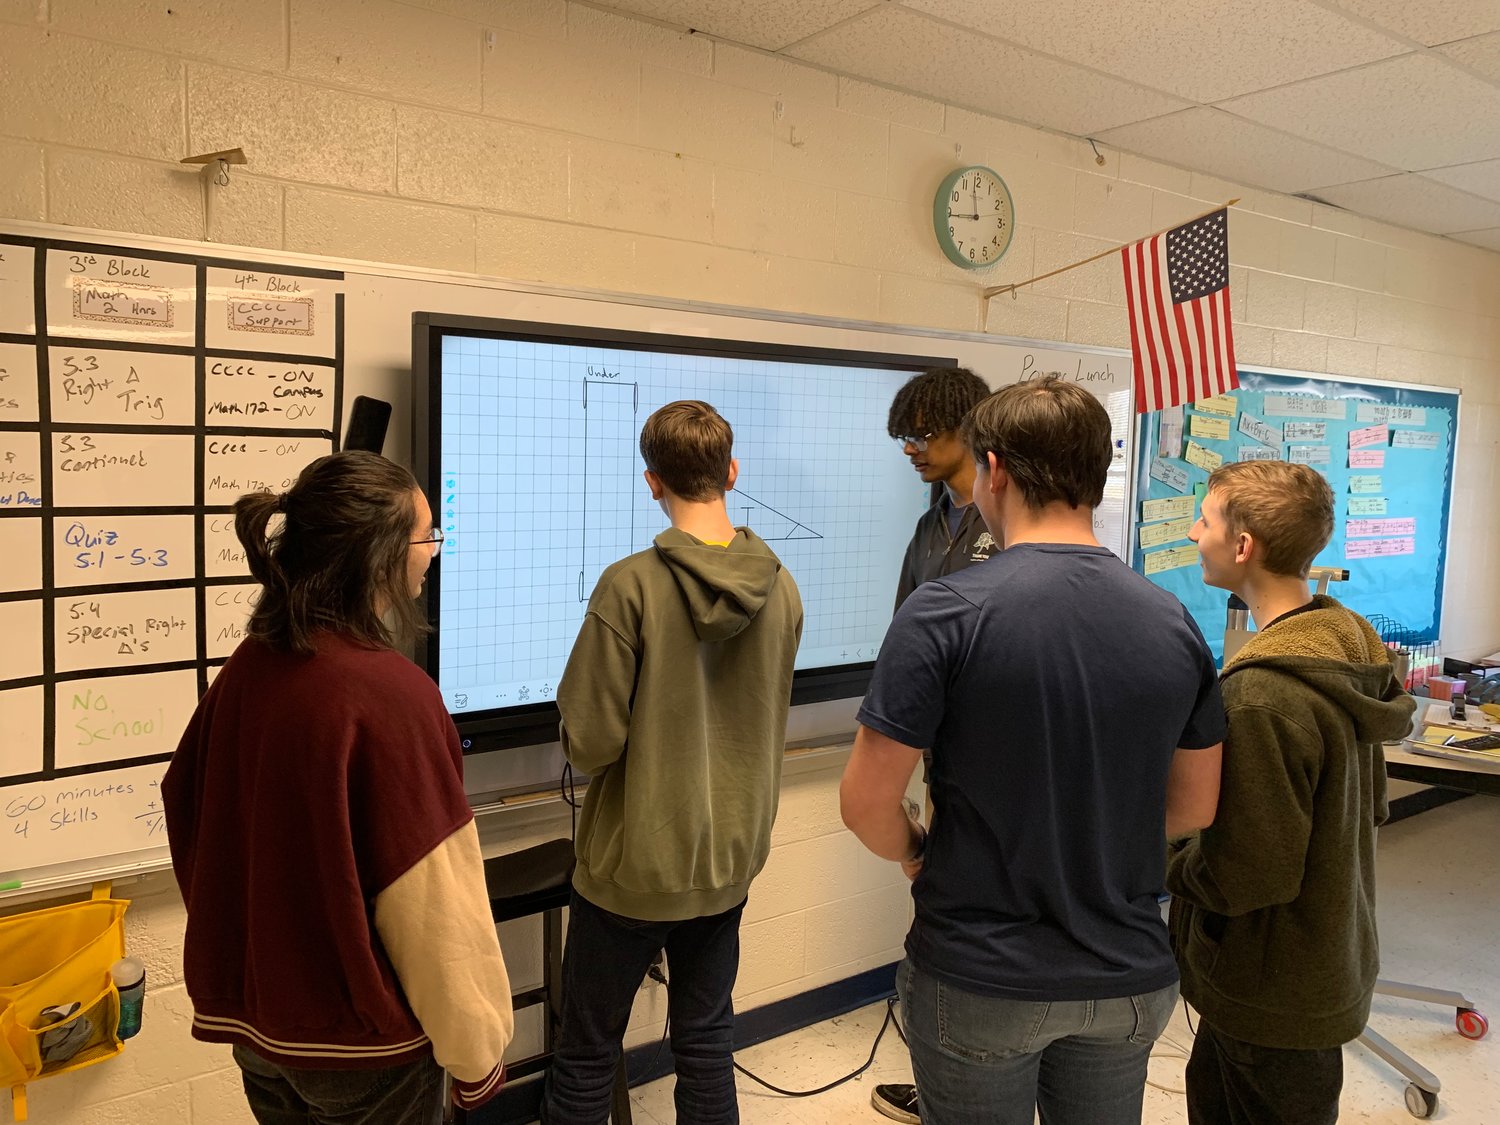 Members of the CSSE Gravity Games team plan out the braking and steering mechanisms for their car. From left to right: Leah Riggsbee, Domnick Pietryga, Caden Bailey, Blake Green, Nickleus Castevens.